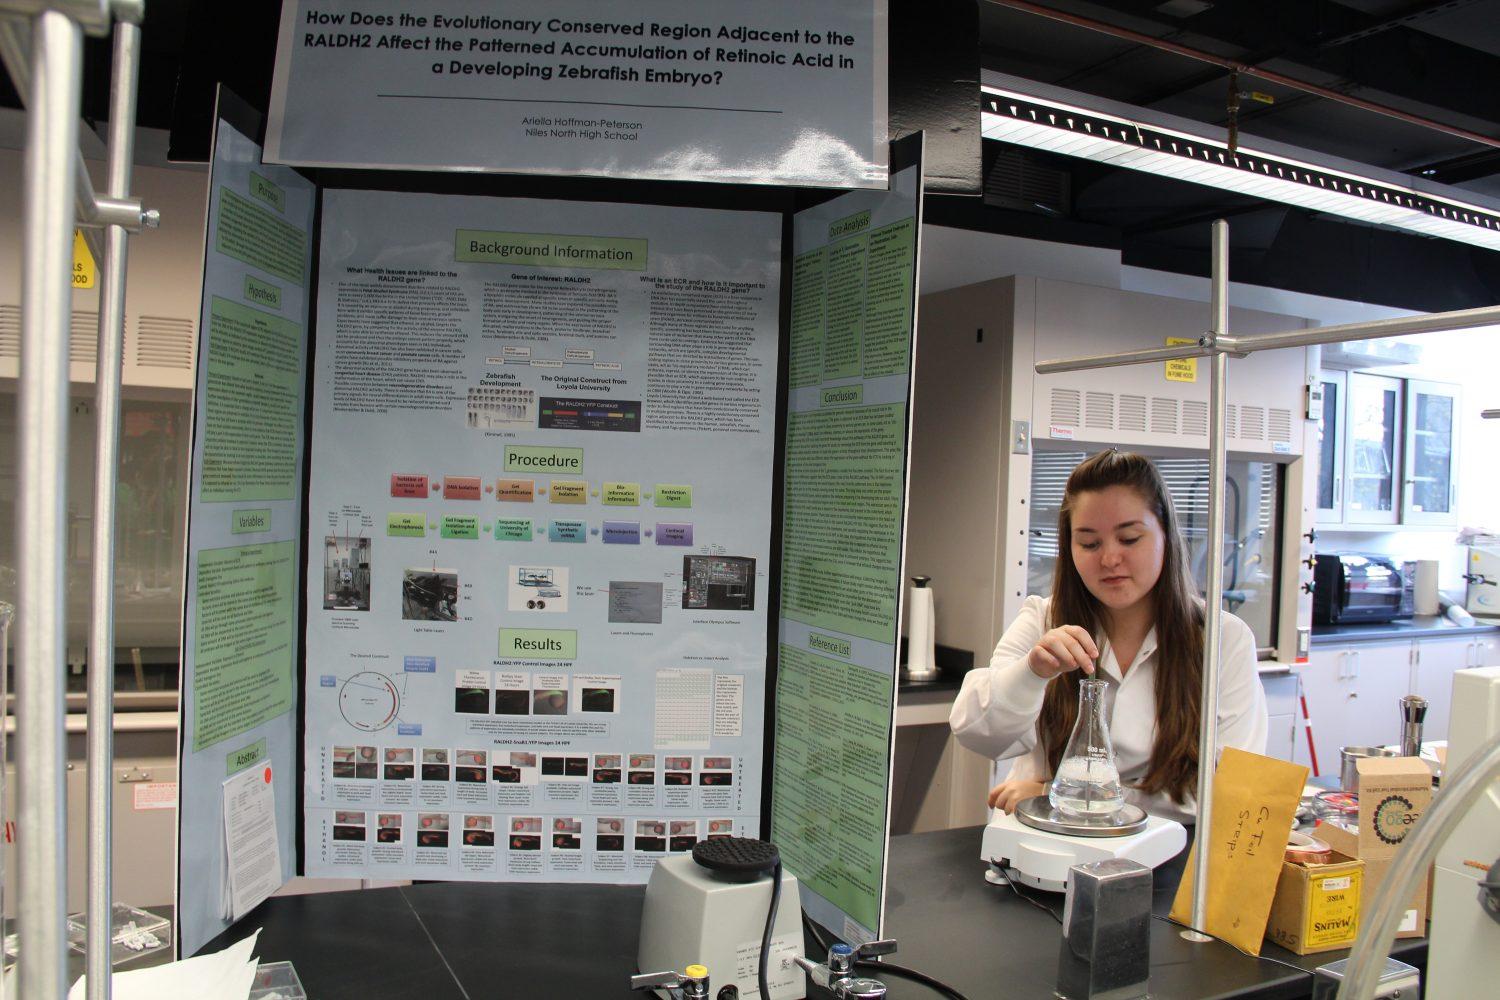 Hoffman-Peterson earns her stripes in local science fair